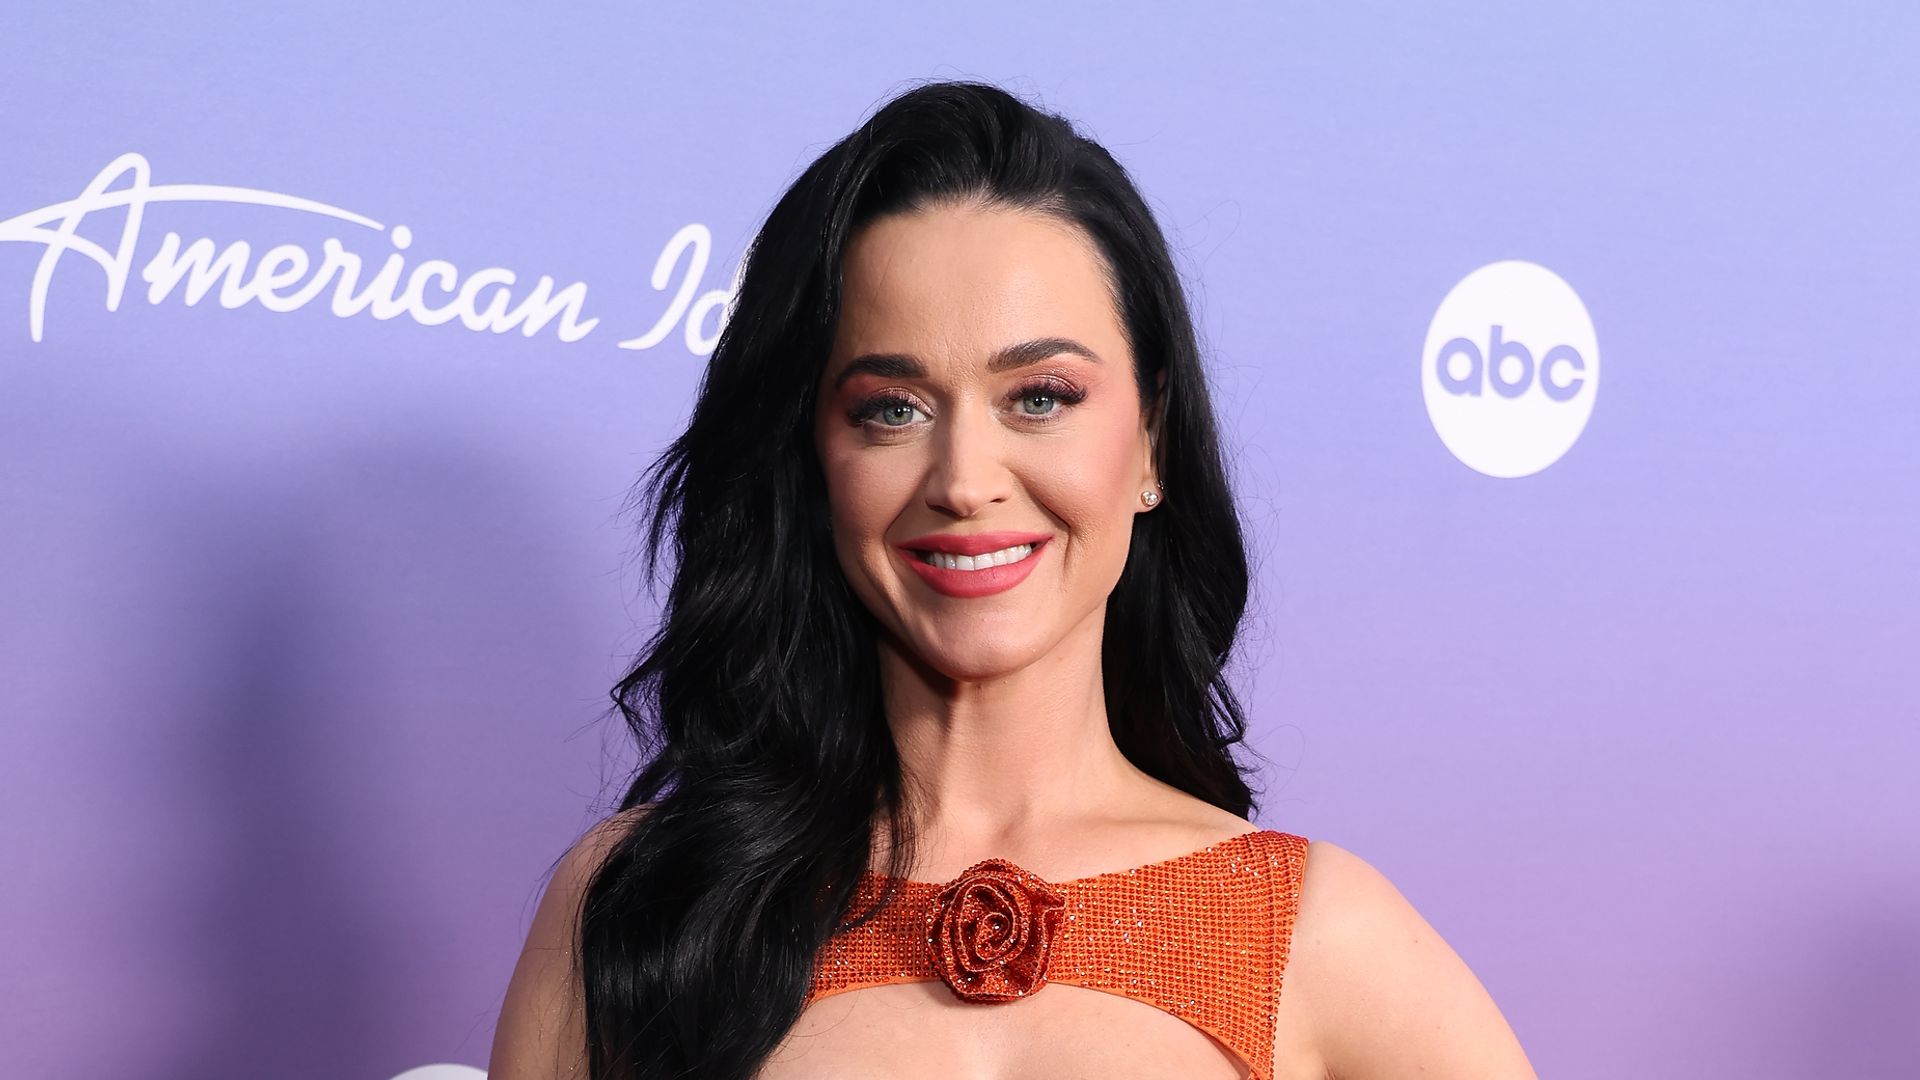 KATY PERRY at the American Idol Season 21 live finale